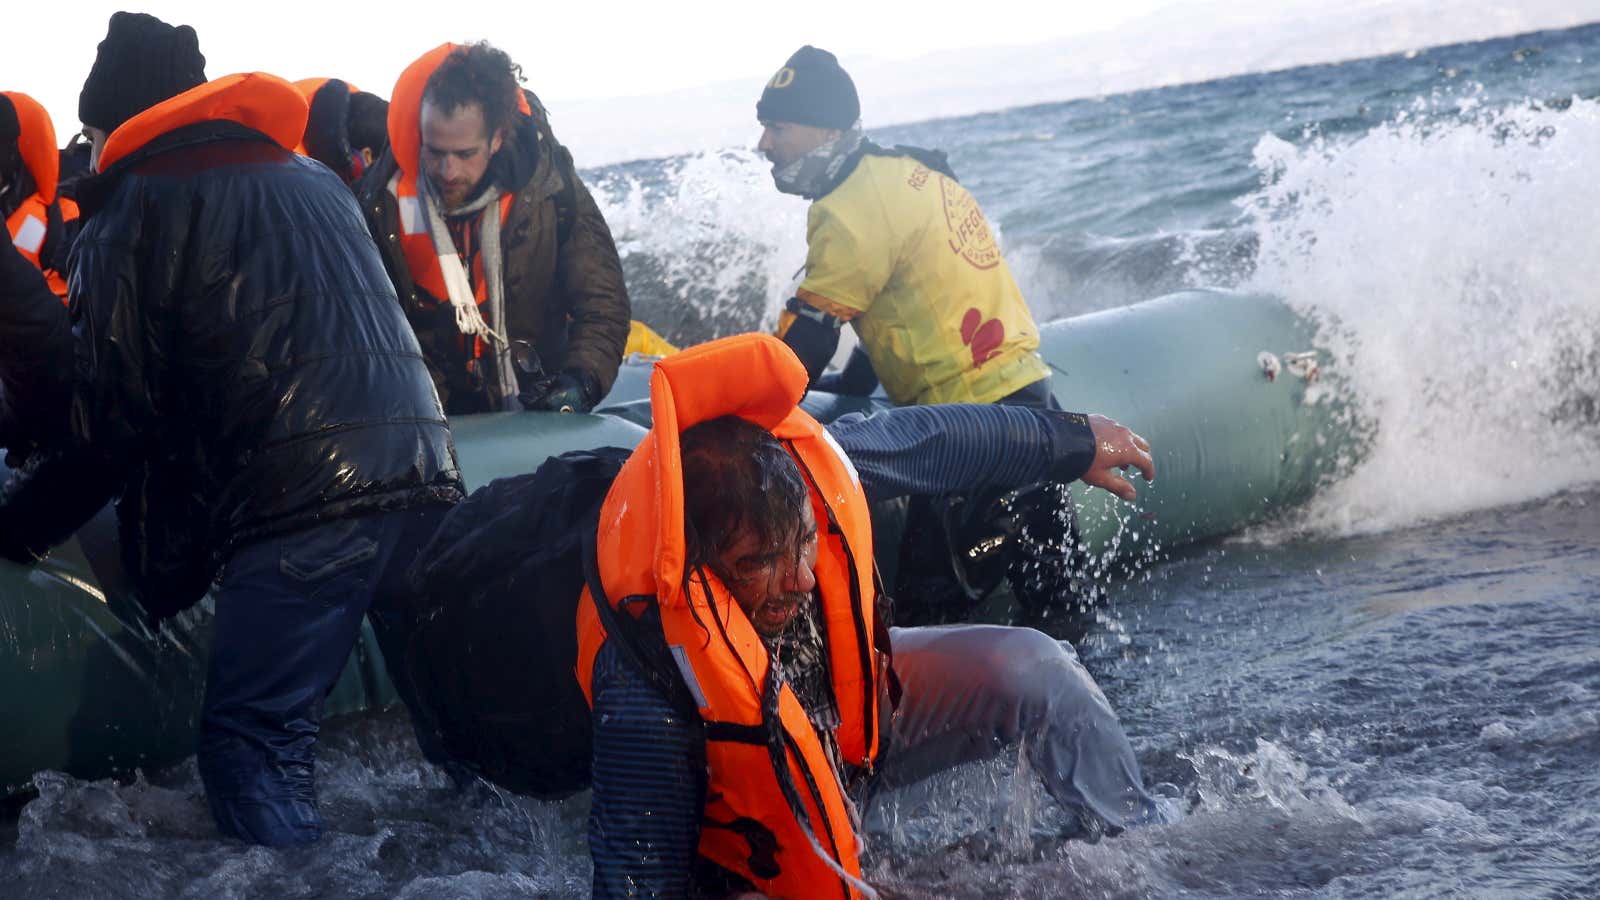 Syrian and Iraqi refugees arrive on a raft in Greece on Jan. 1, 2016.